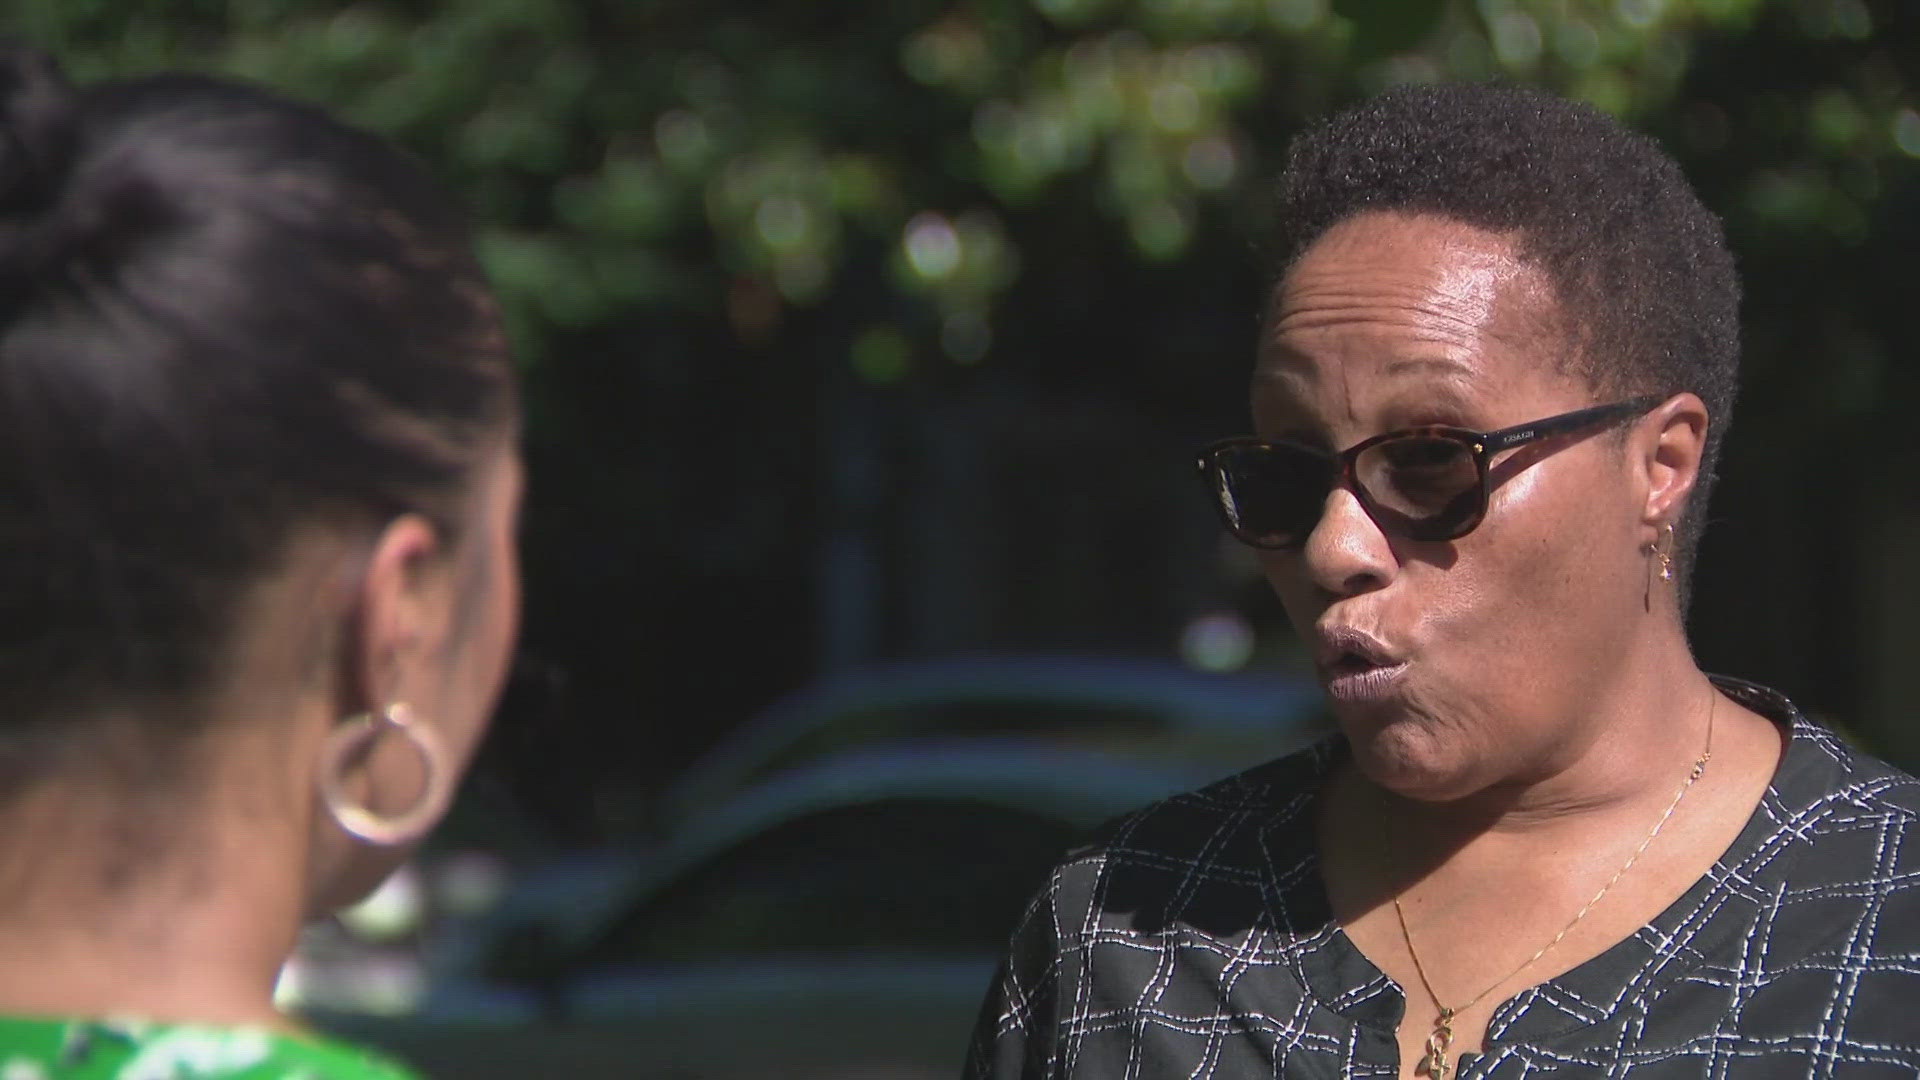 She shared her story with WUSA9. This is the second time since 2022 we've investigation claims of abuse at the hospital.